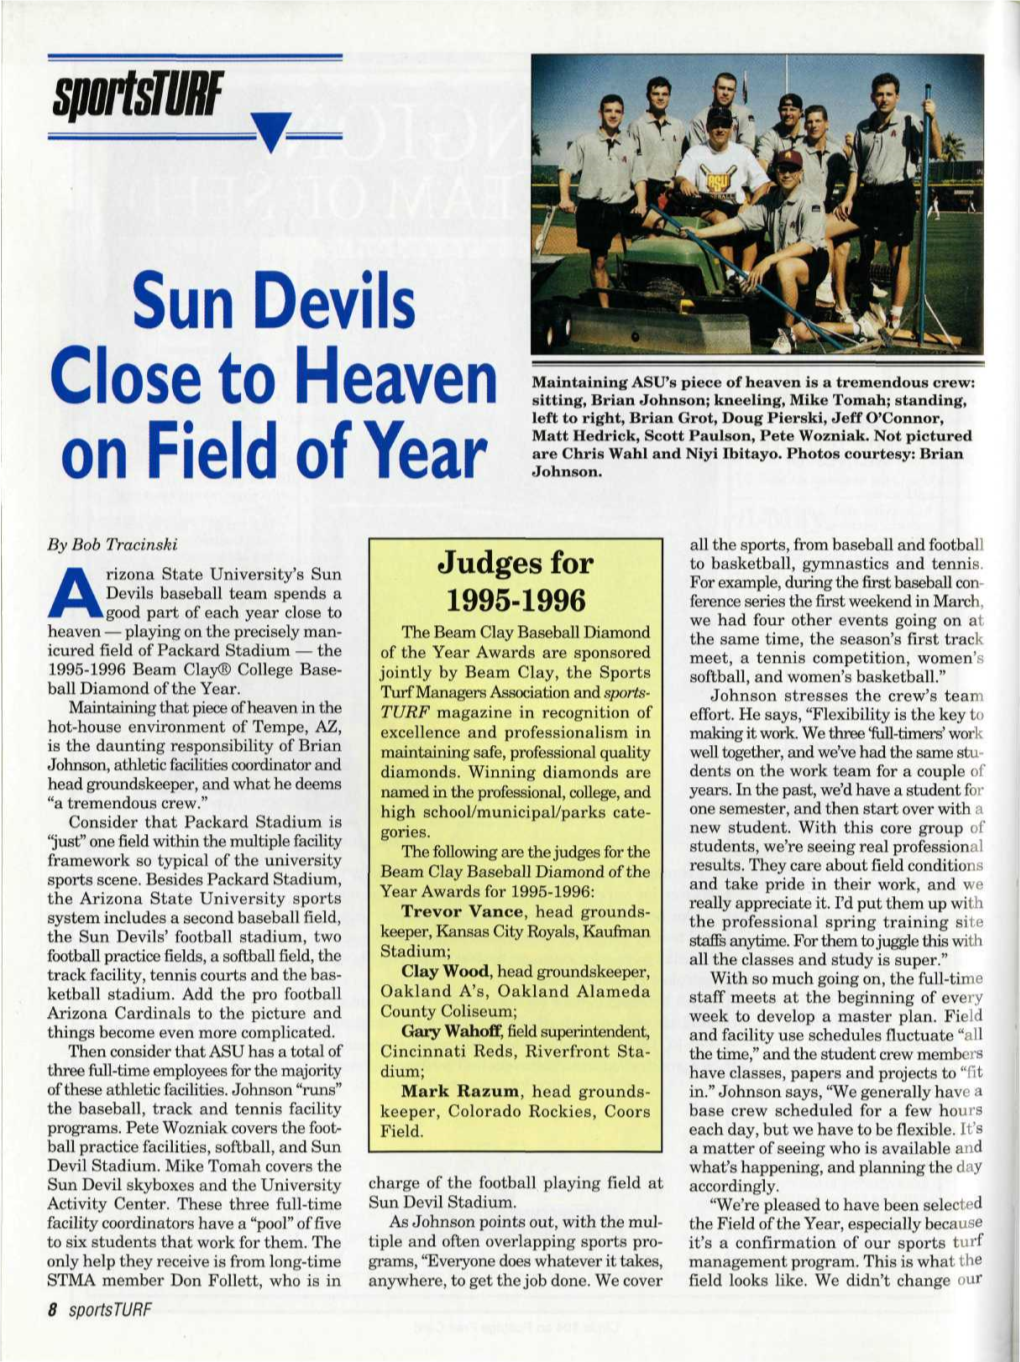 Sun Devils Close to Heaven on Field of Year